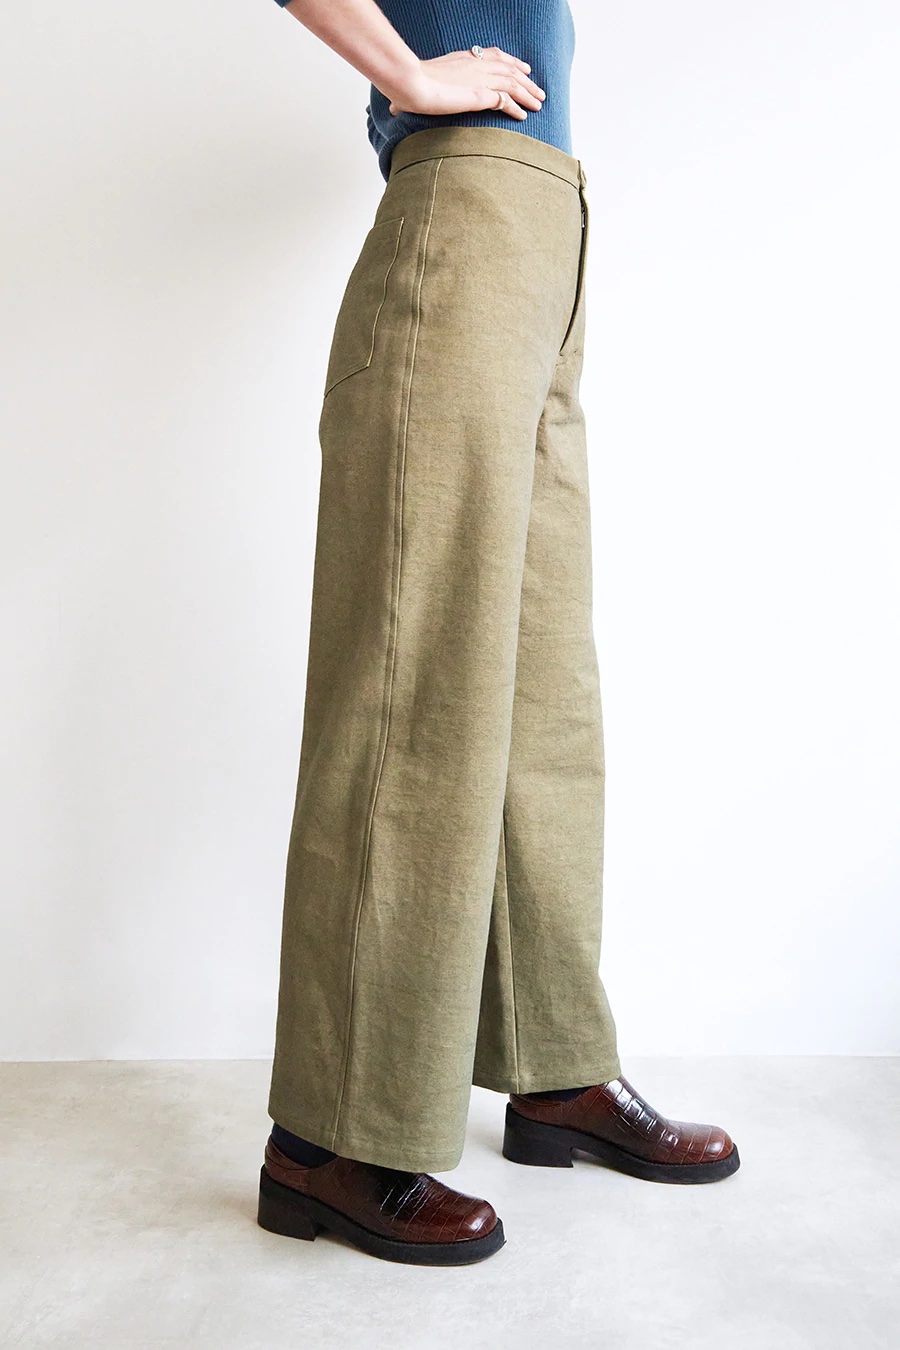 The Modern Sewing Co. Daphne Trousers - The Fold Line